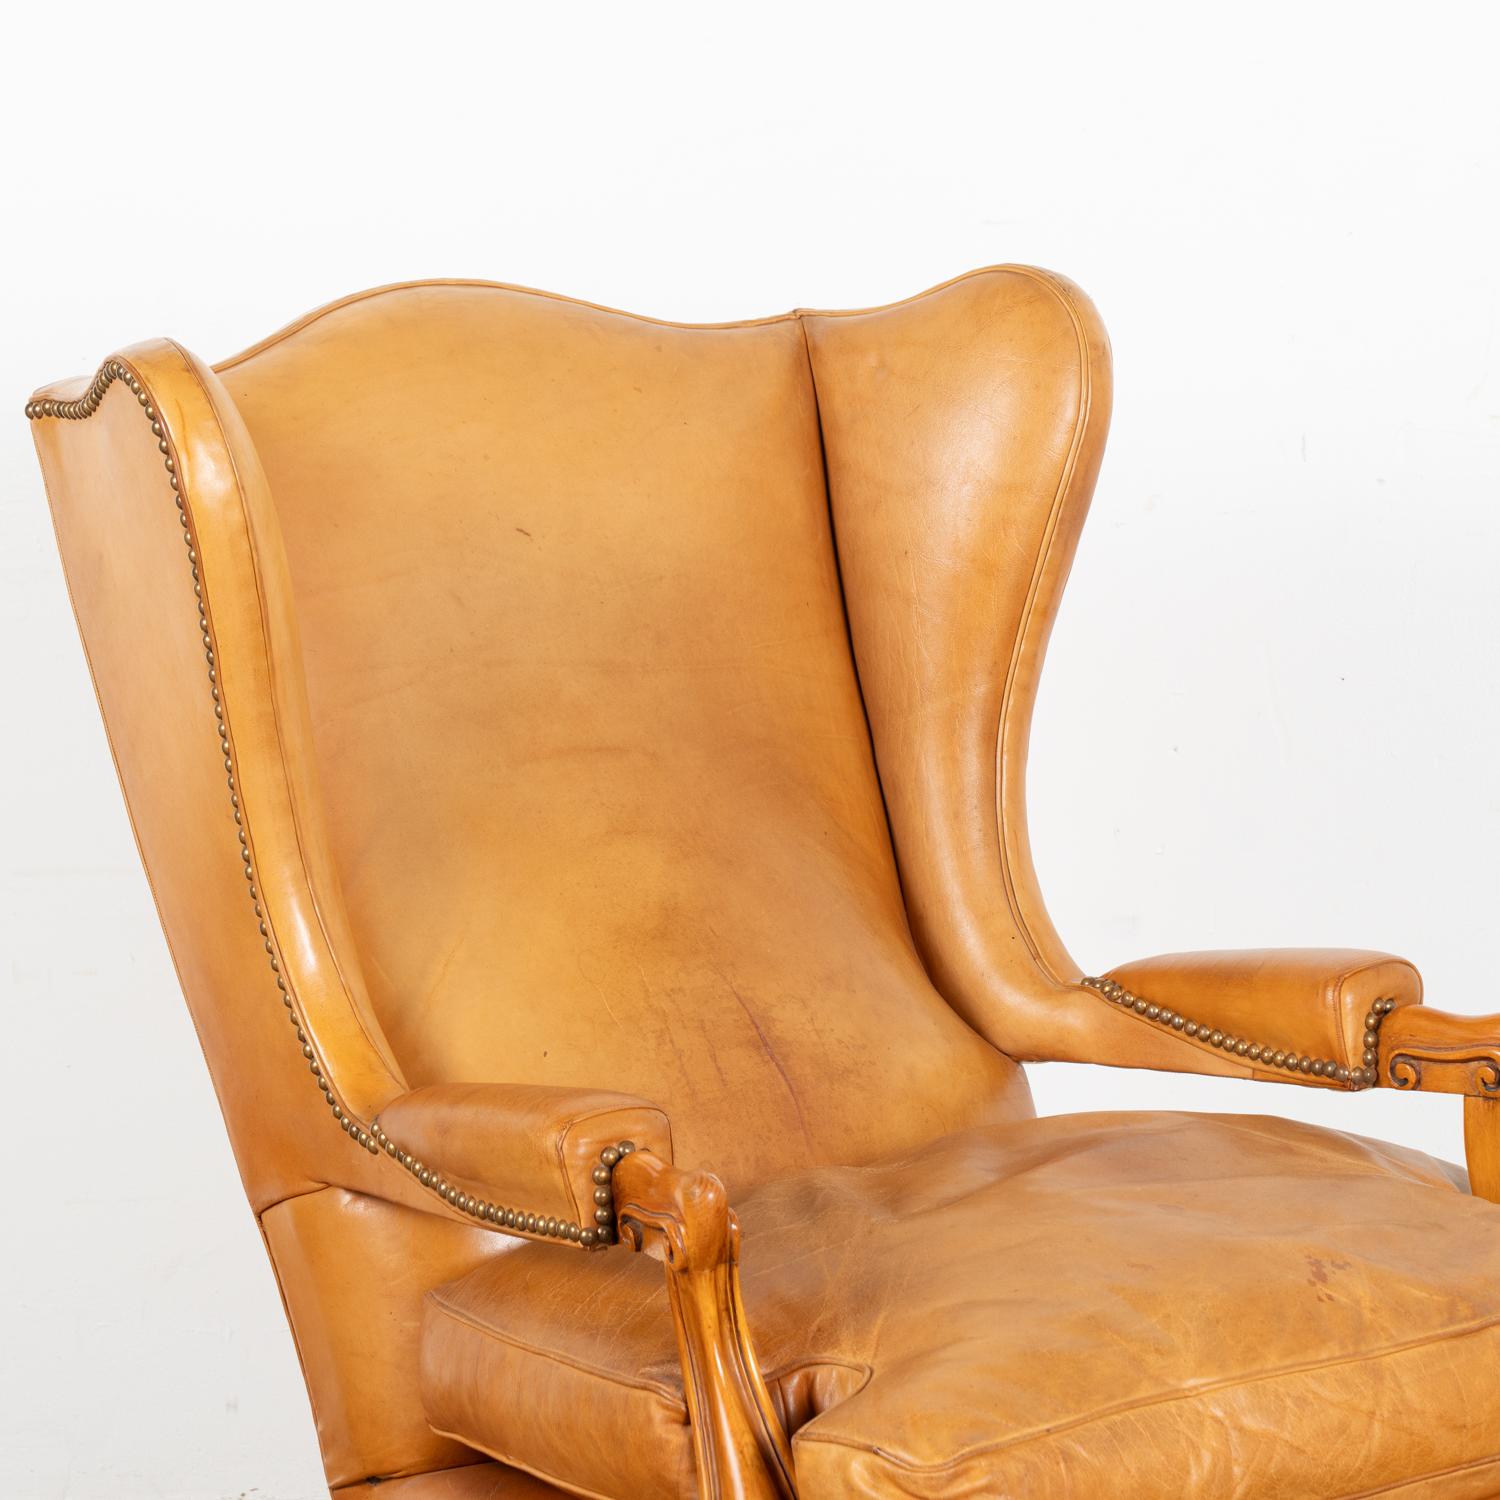 Danish Vintage Camel Colored Leather Wingback Armchair, Denmark circa 1940 For Sale